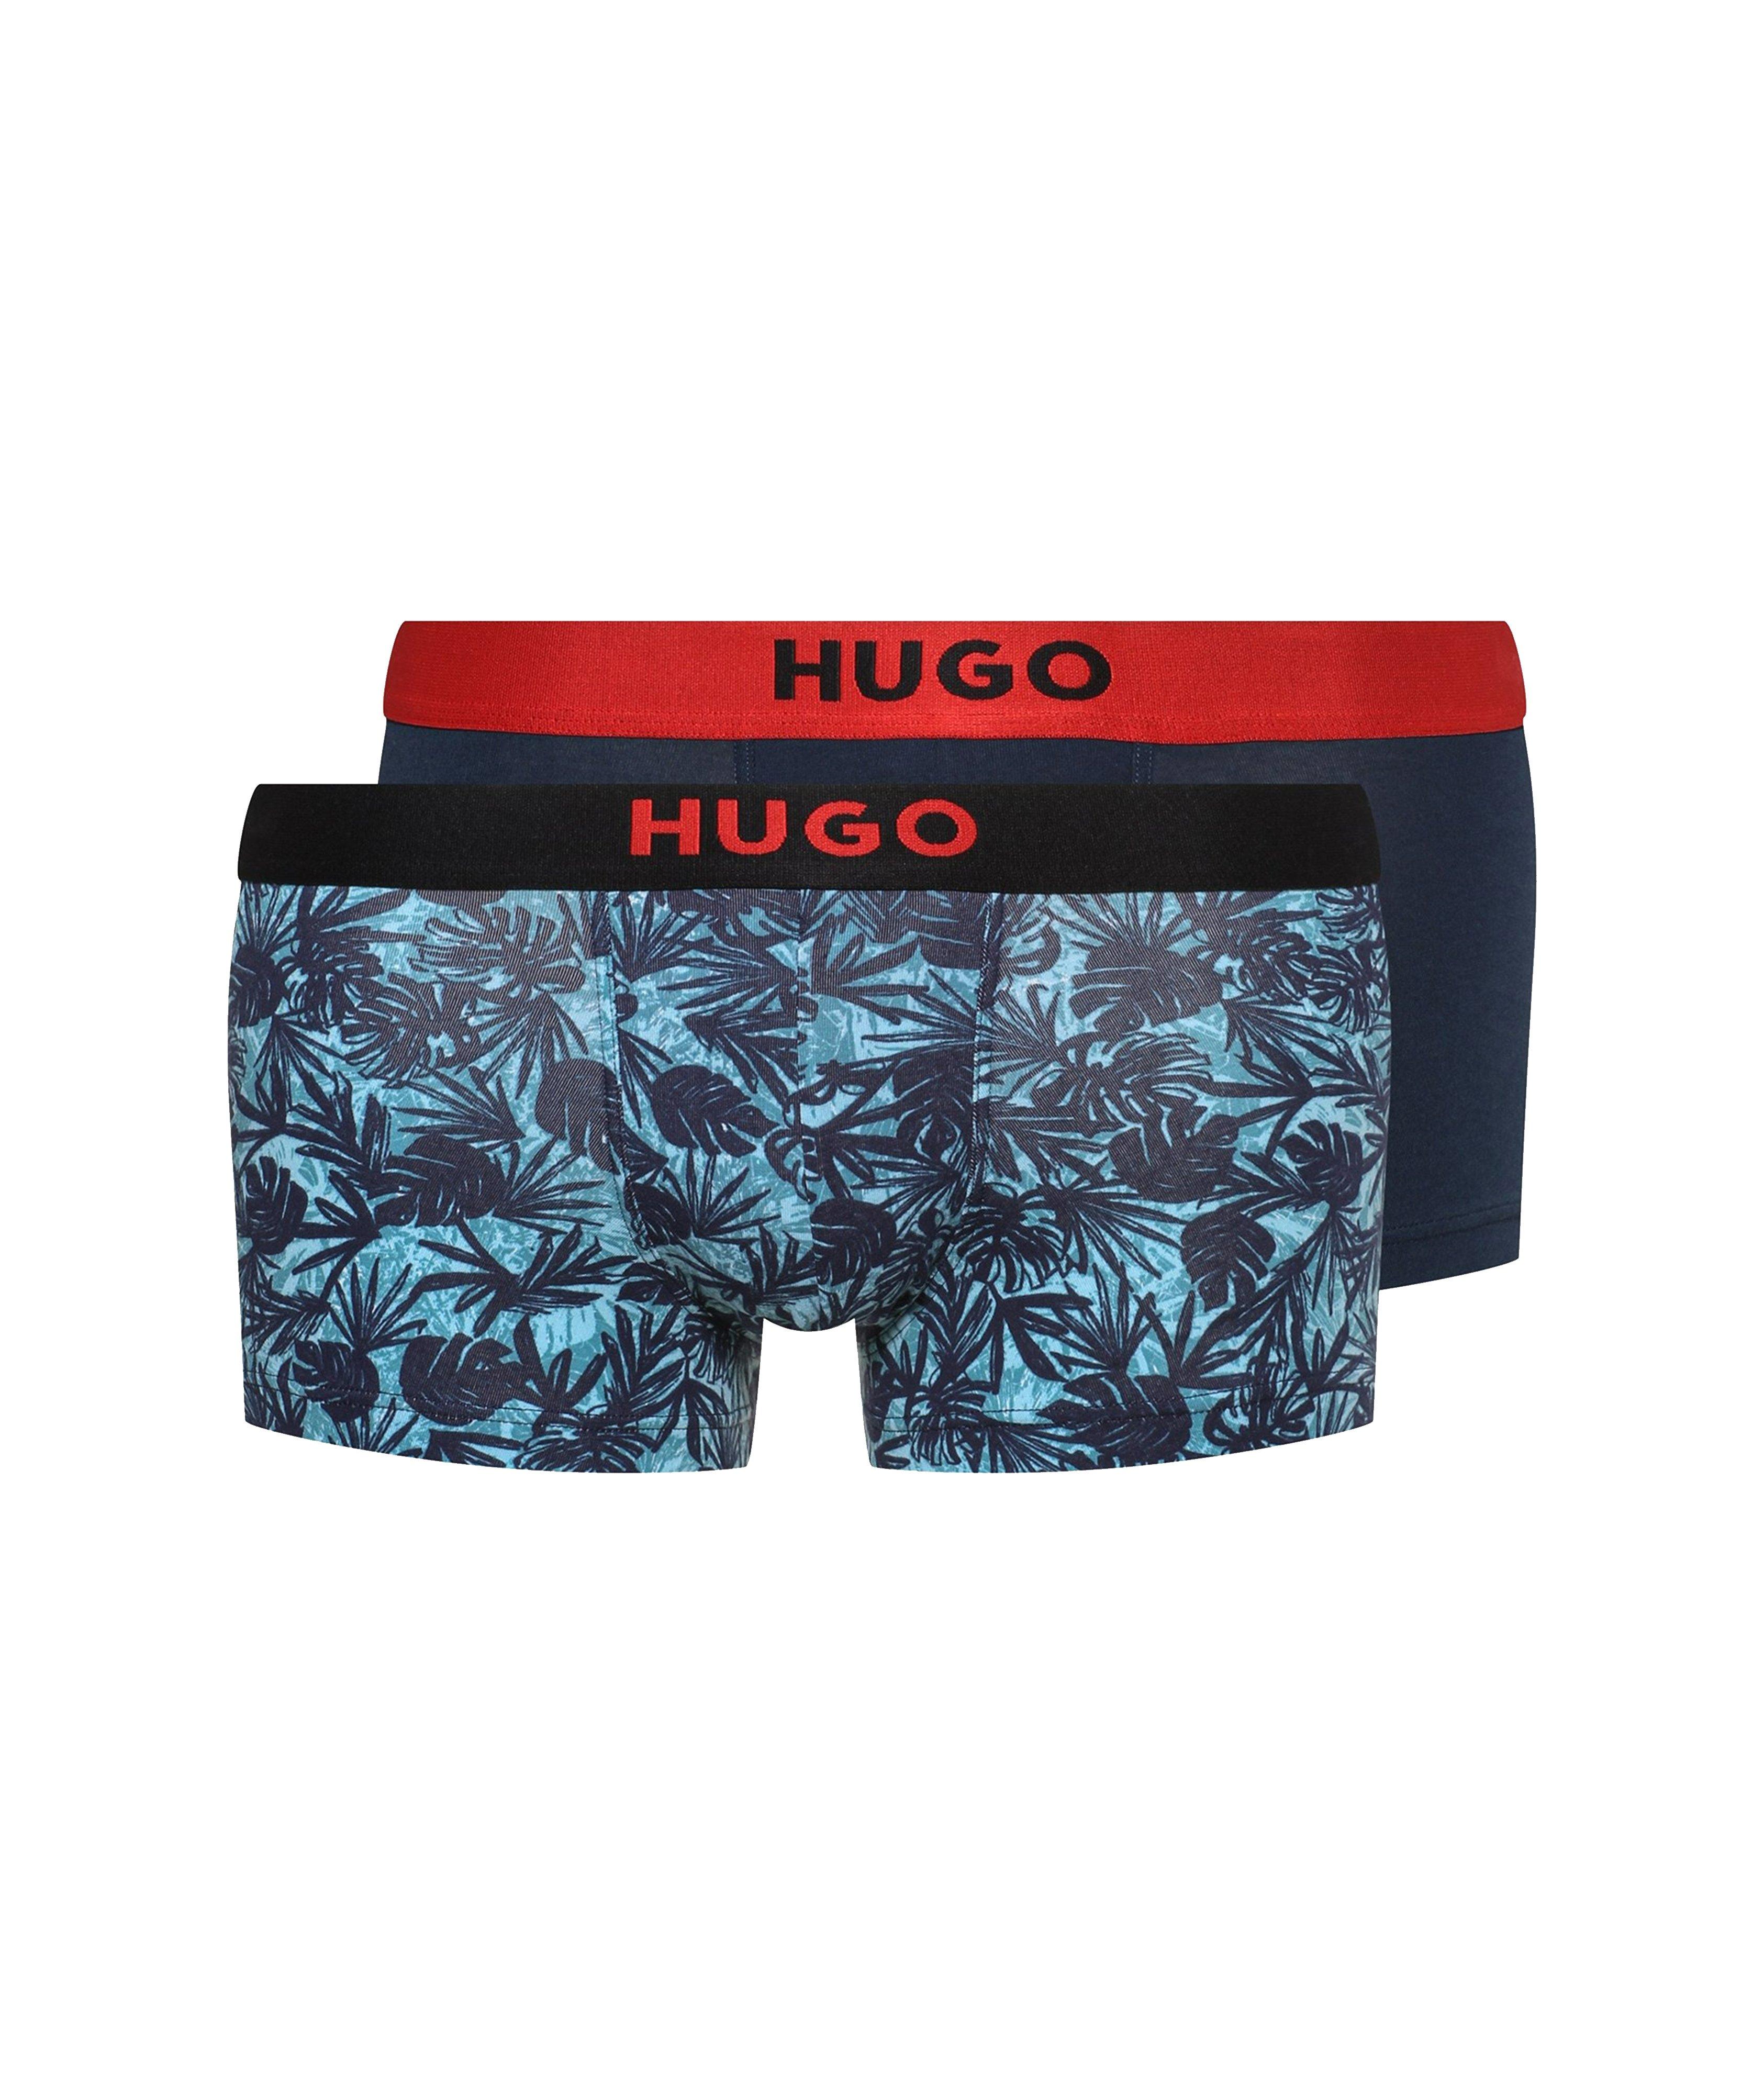 Two-Pack Stretch Cotton Boxers image 0